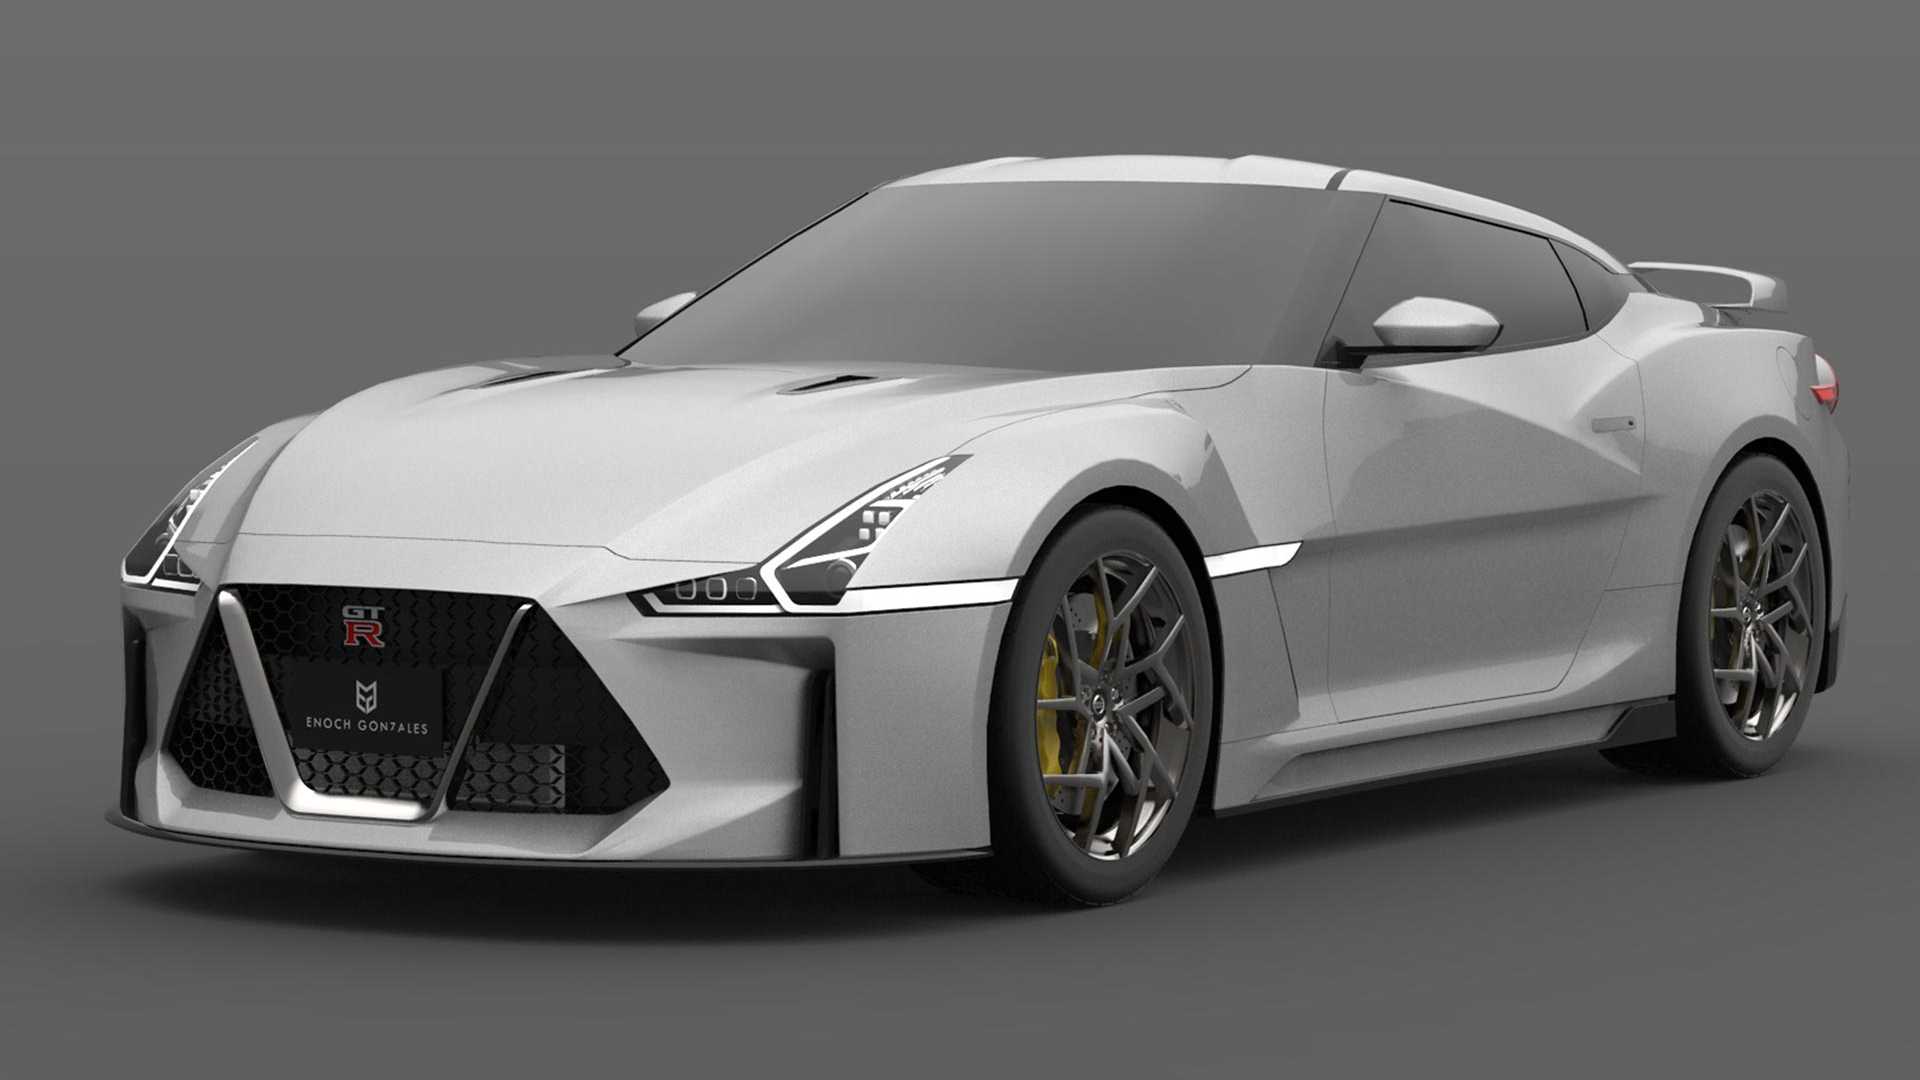 When will Nissan build the R36 GT-R: 50 years of GT-R